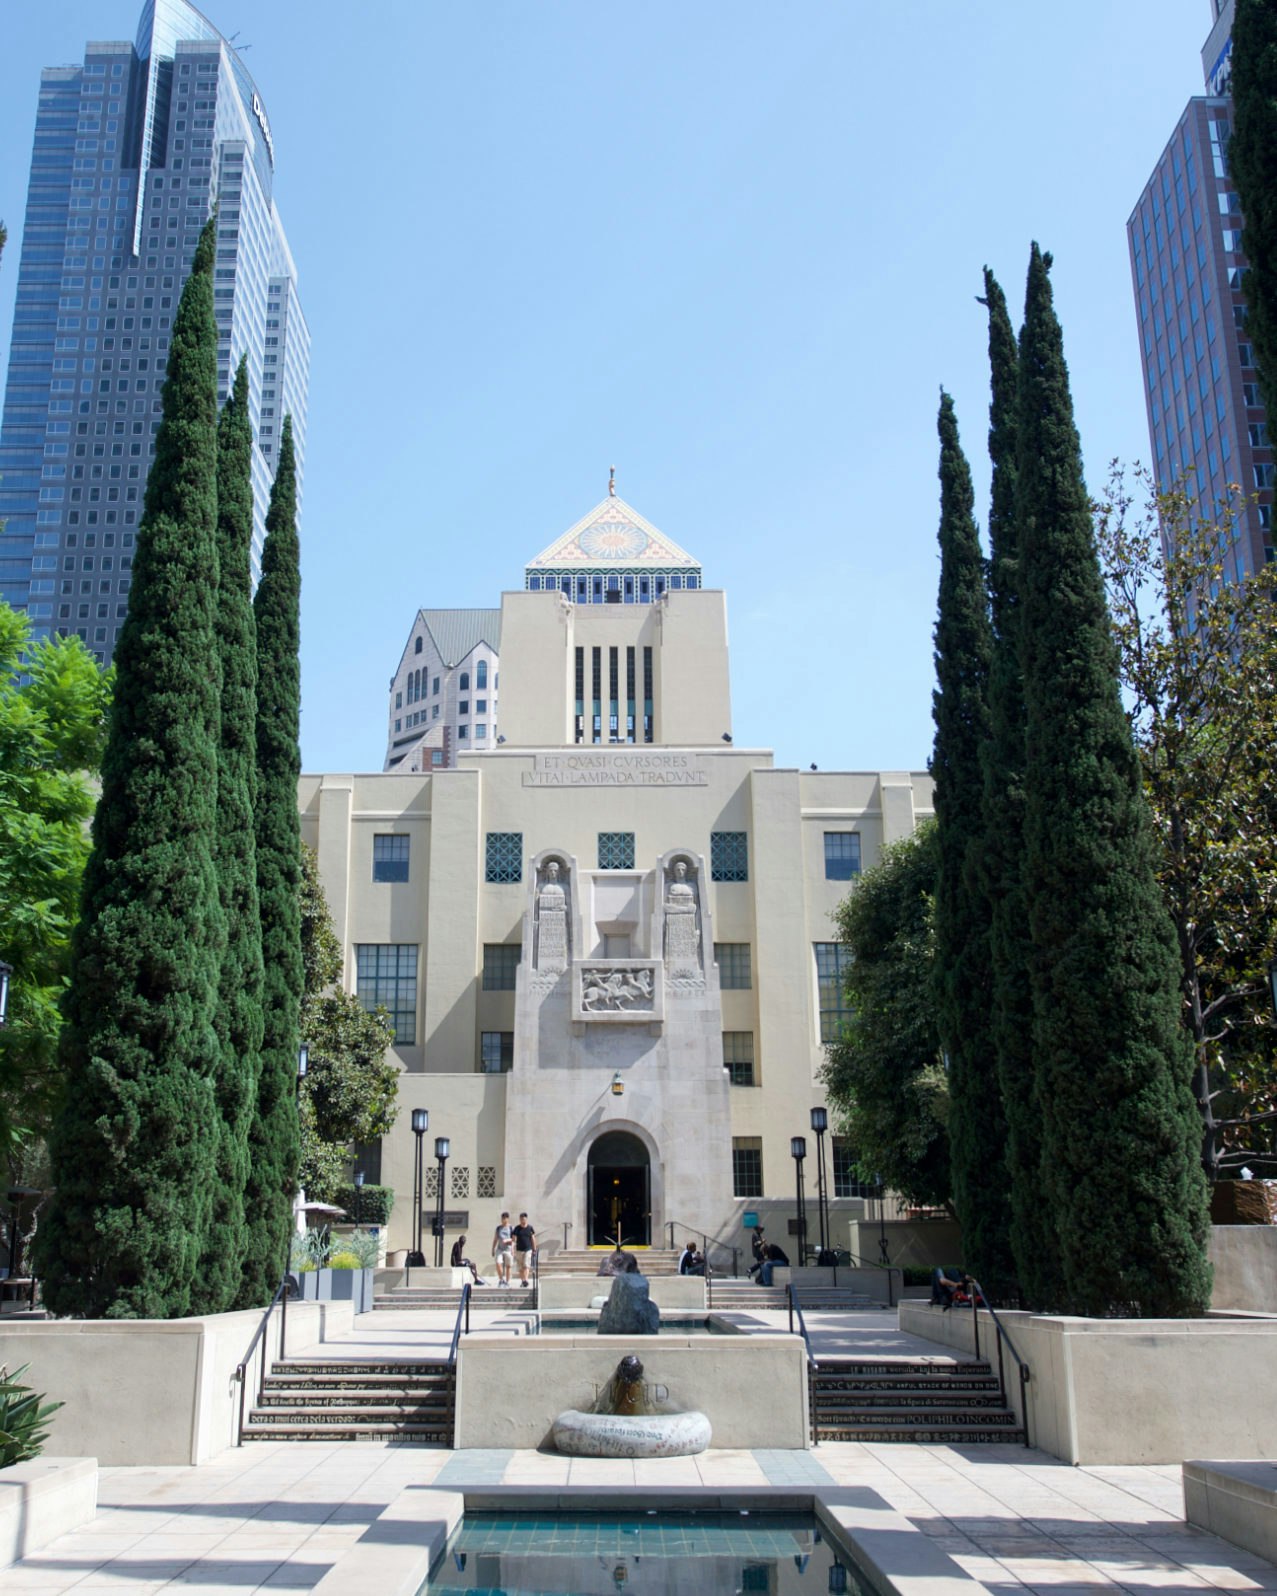 Los Angeles Central Library. Photo courtesy of Los Angeles Public Library.